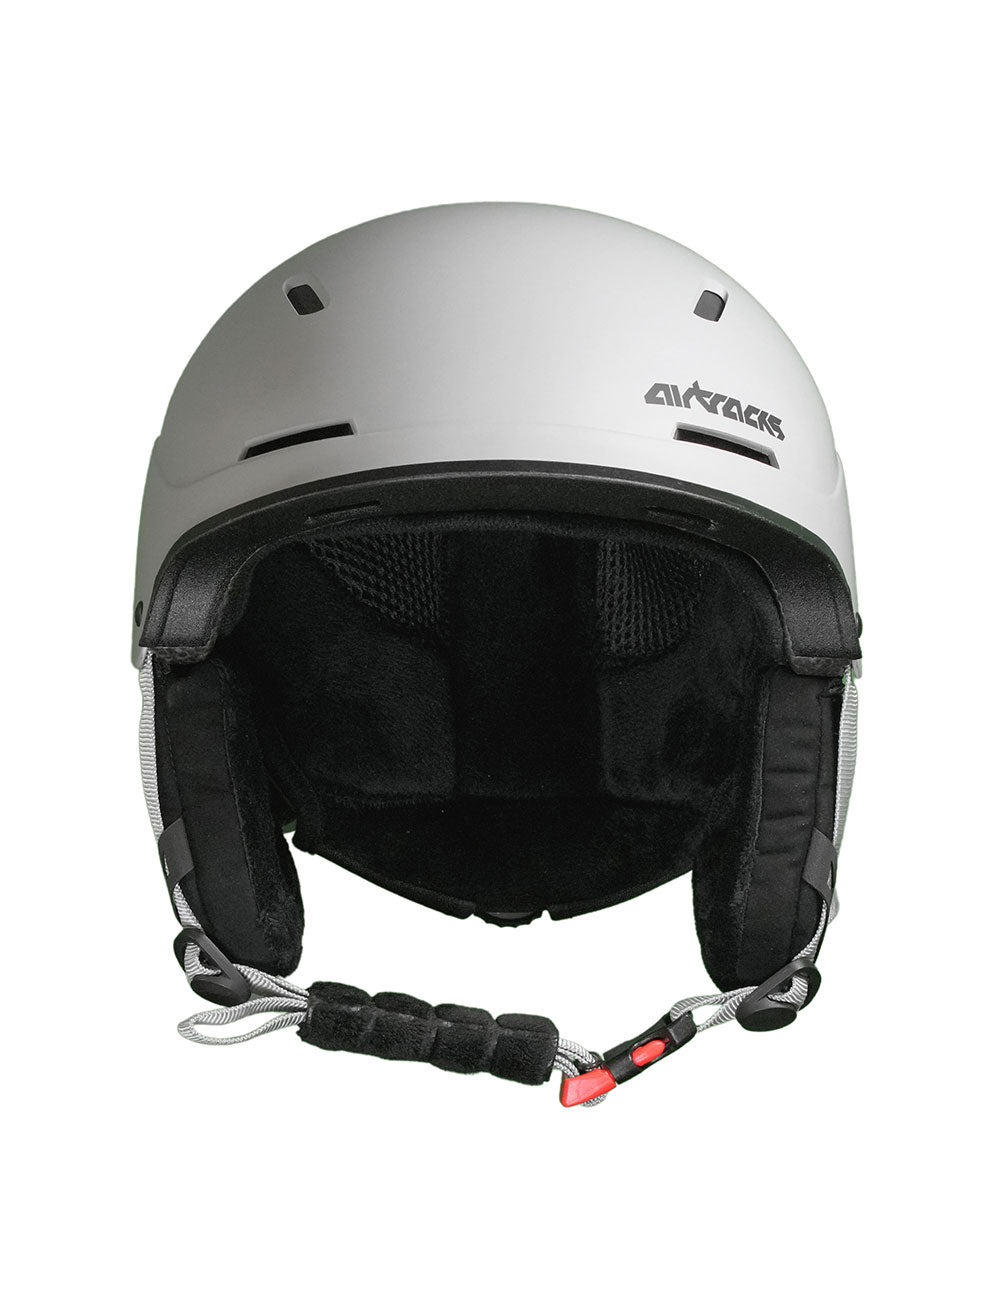 Strong_SB_Helm_sps2103_1300_3